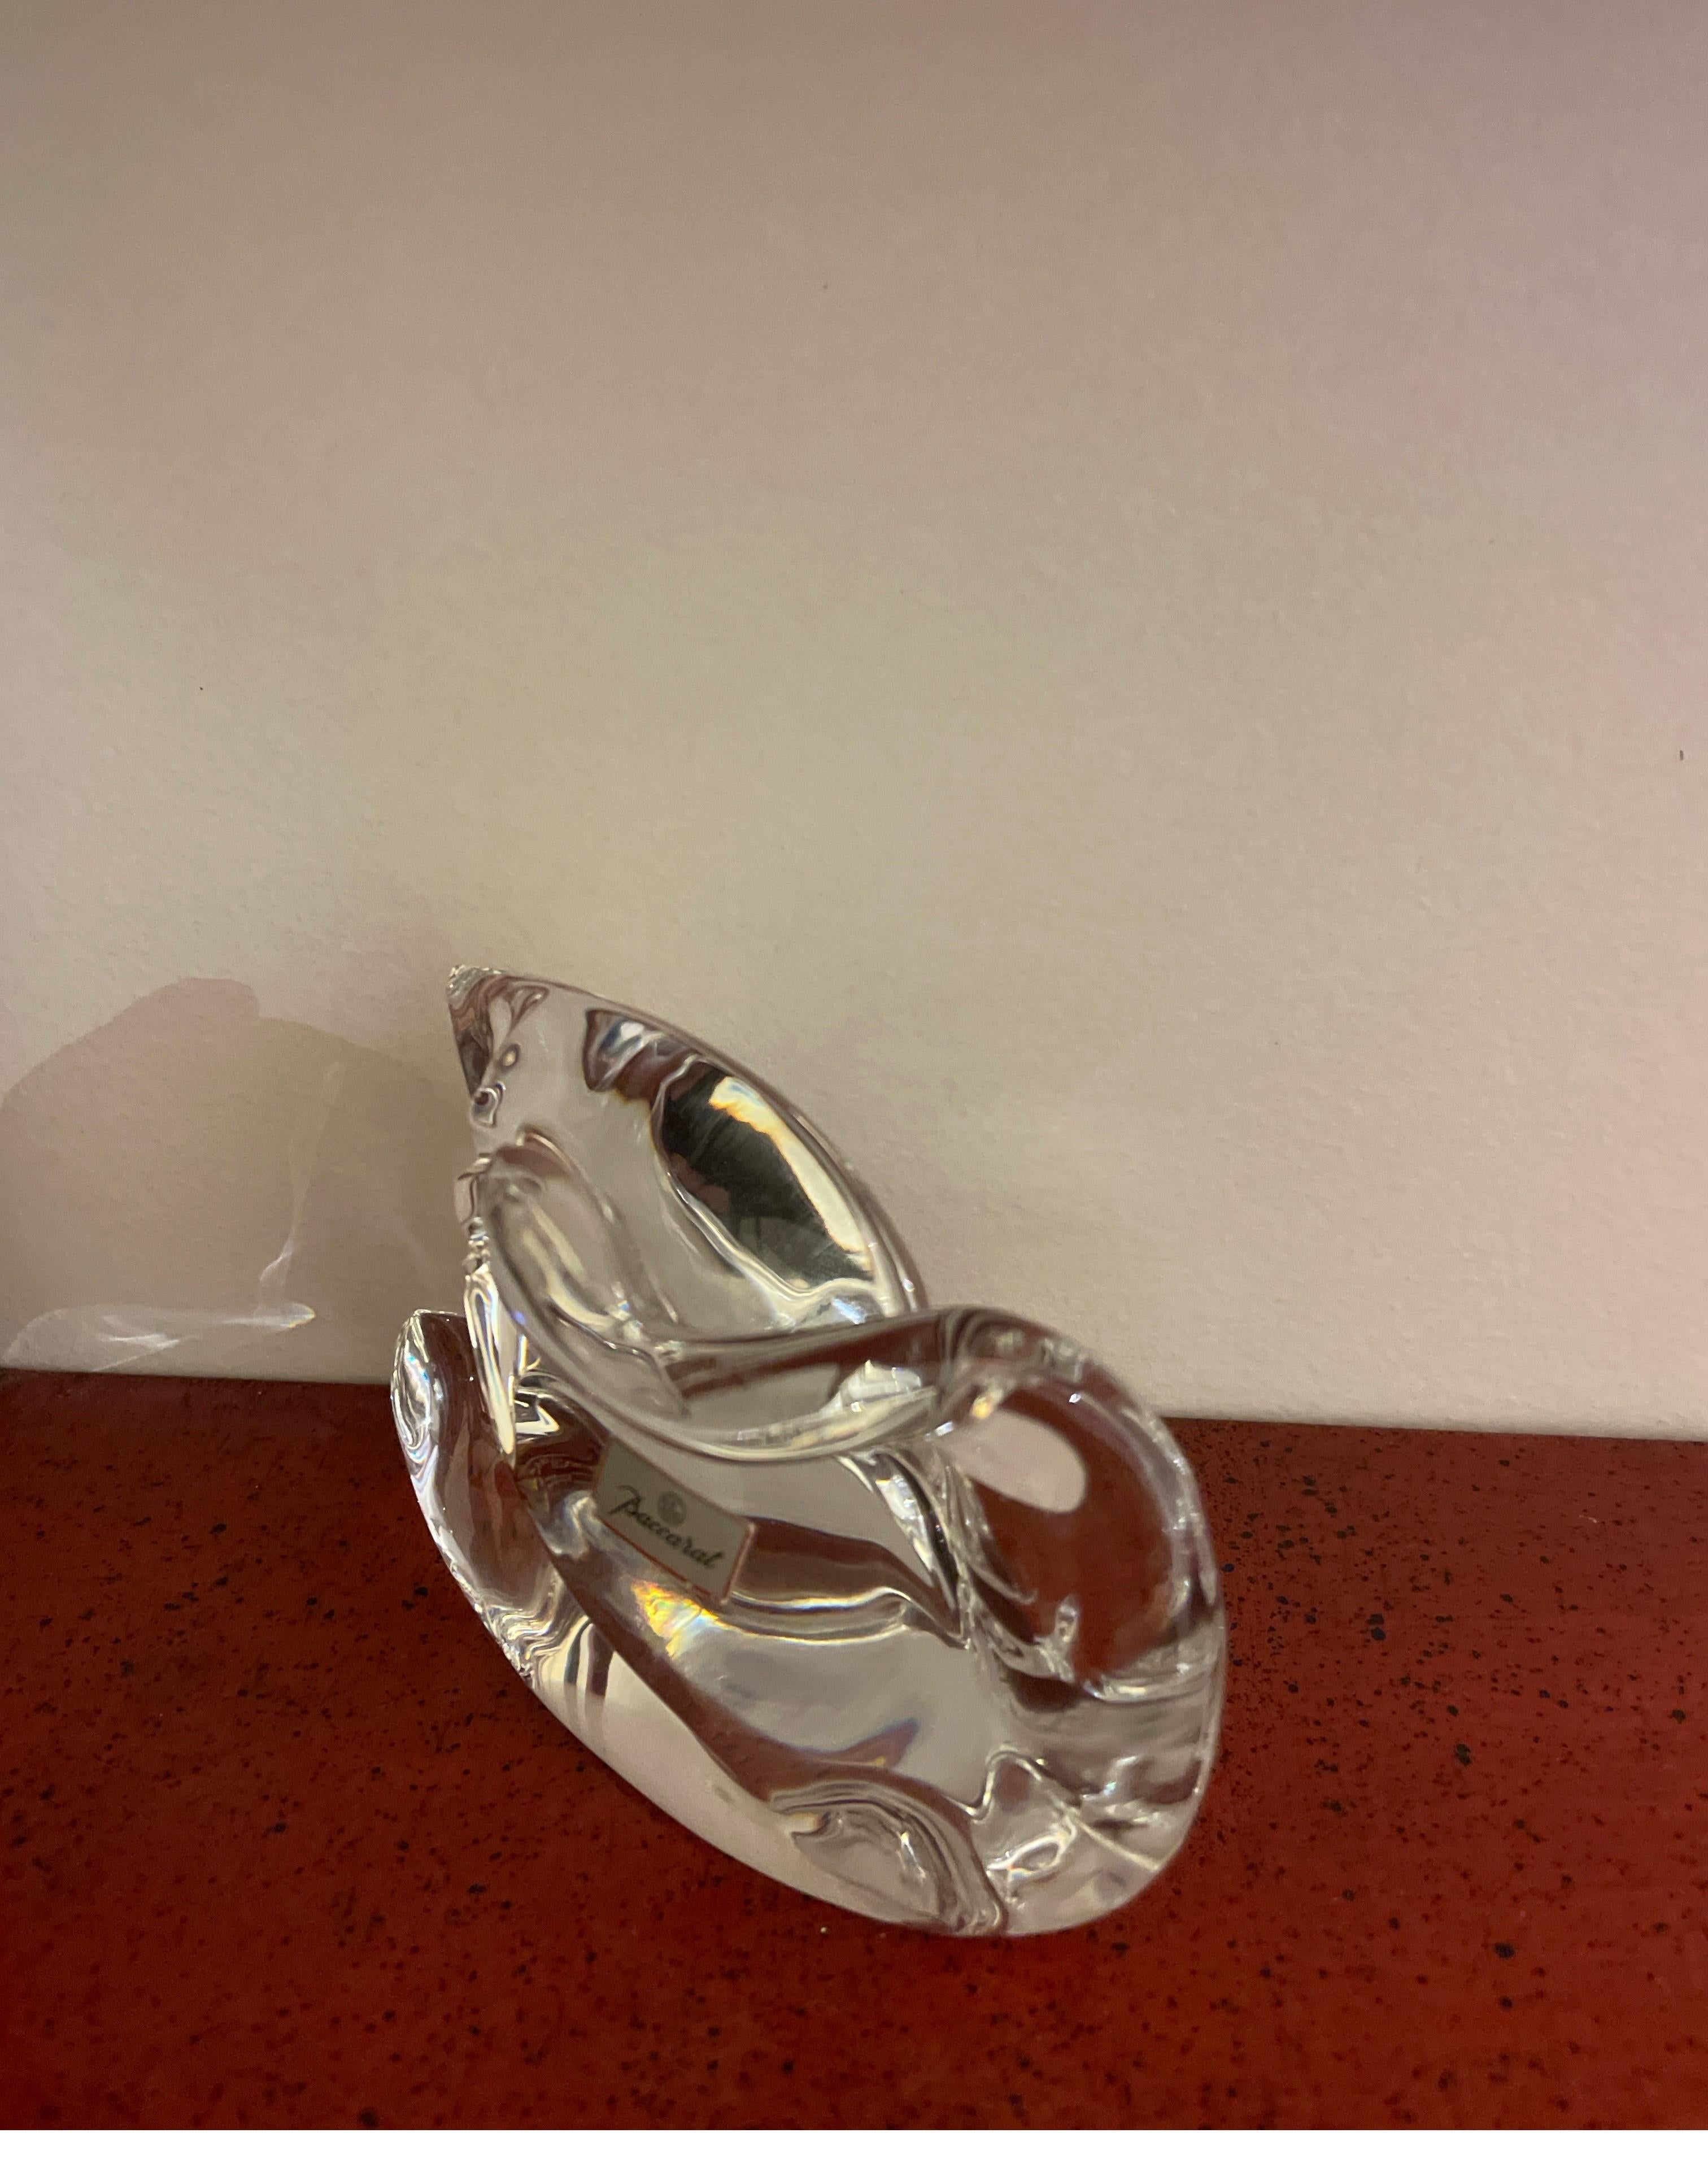 Sweet Baccarat crystal swan figurine with it's head turned back. A lovely piece for your collection.